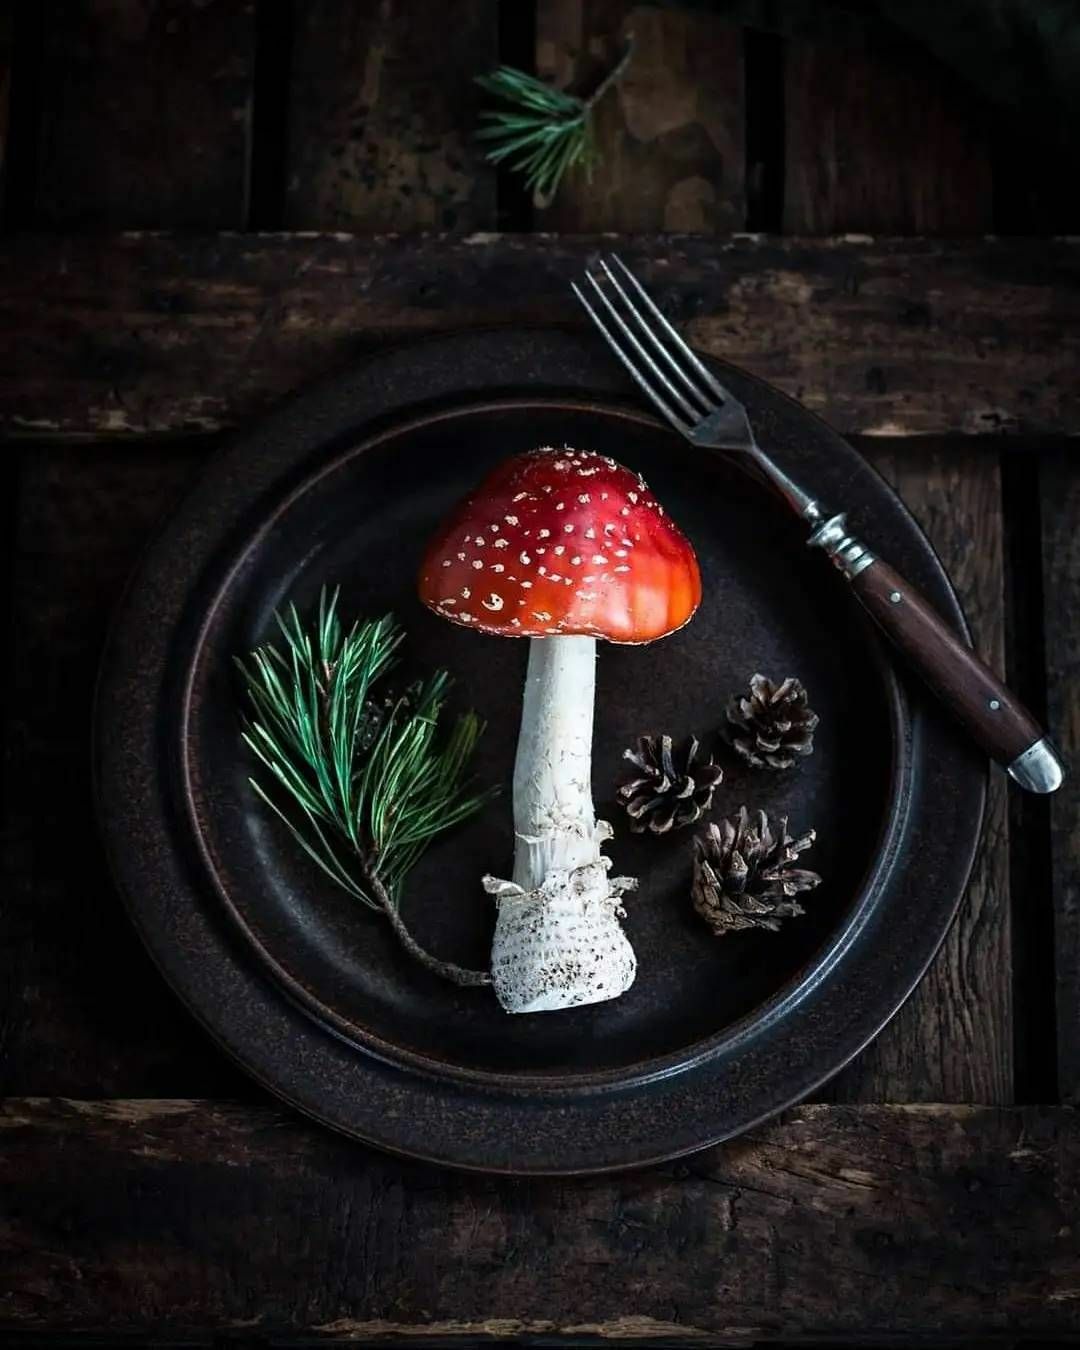 Amanita Muscaria: The history of use